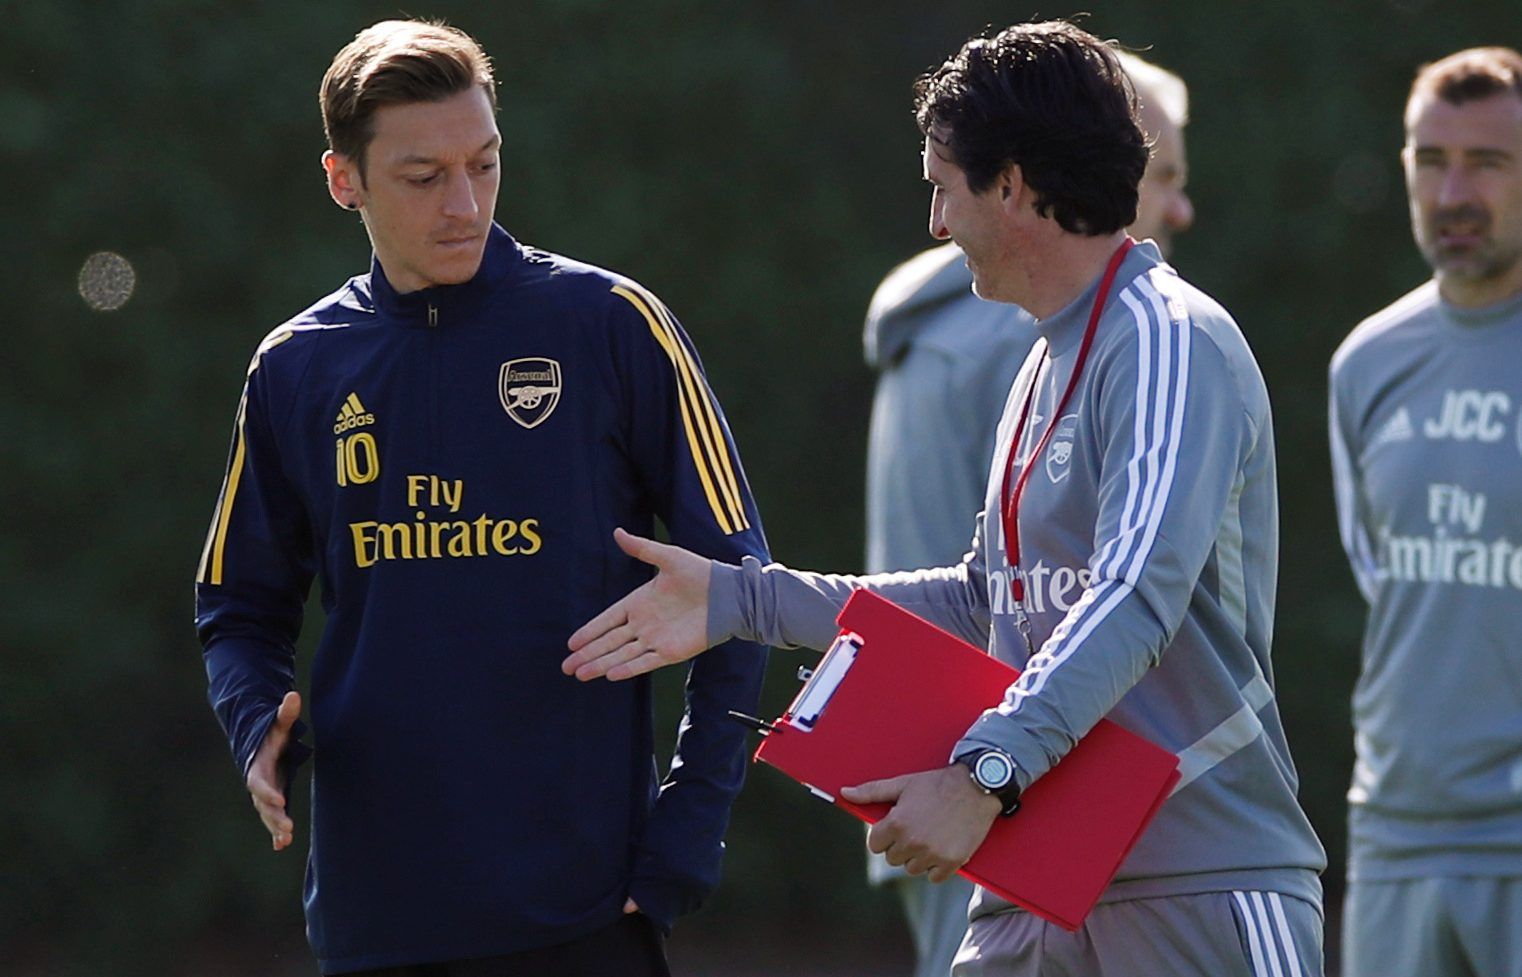 Soccer Football - Europa League - Arsenal Training - Arsenal Training Centre, St Albans, Britain - September 18, 2019   Arsenal manager Unai Emery and Mesut Ozil during training   Action Images via Reuters/Paul Childs